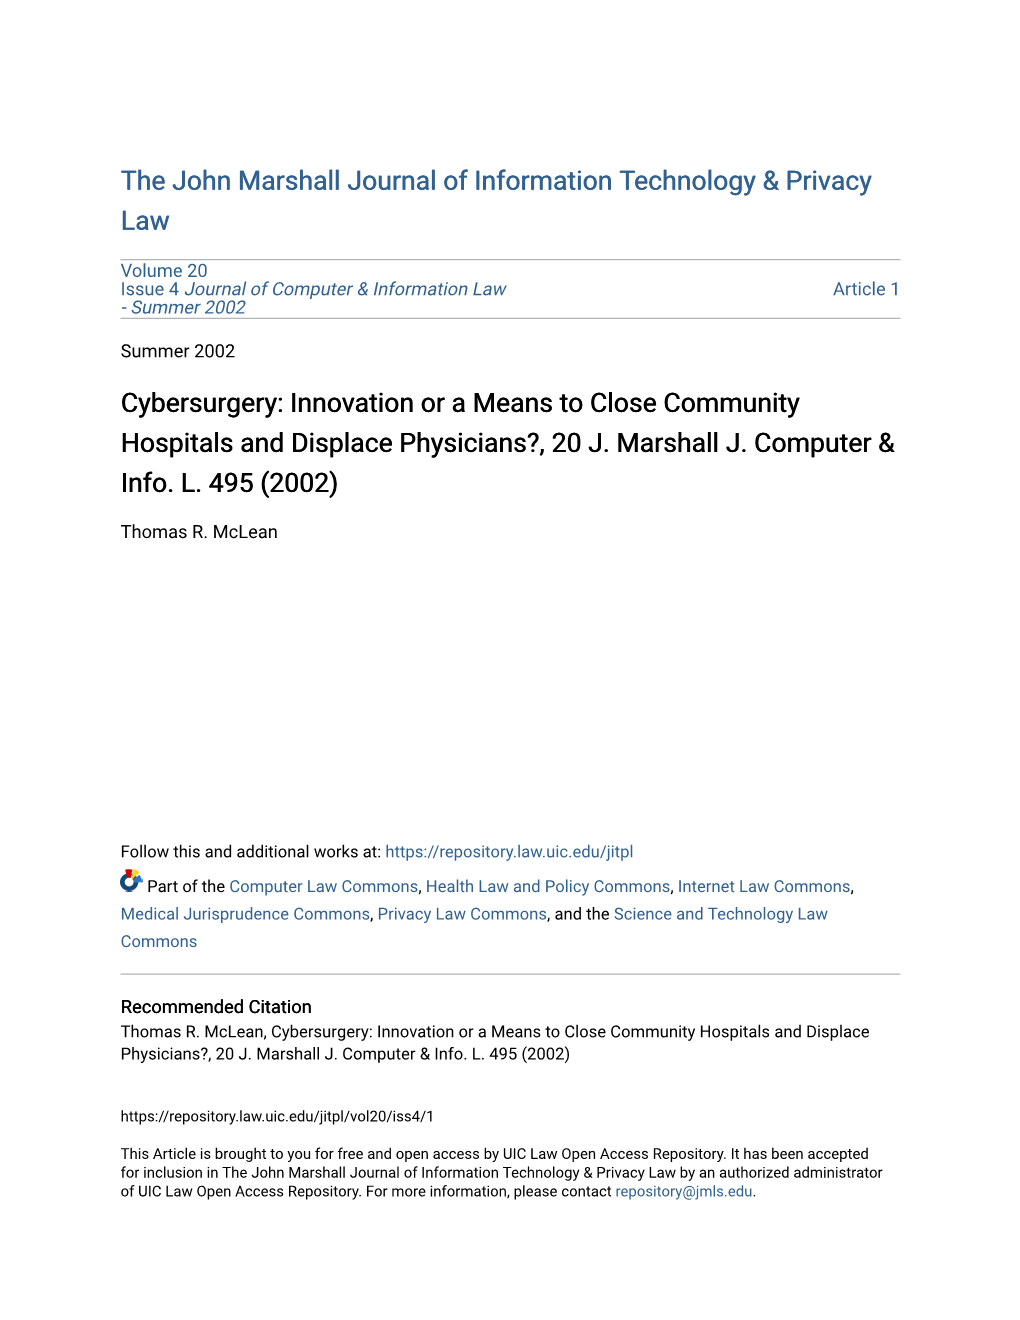 Cybersurgery: Innovation Or a Means to Close Community Hospitals and Displace Physicians?, 20 J